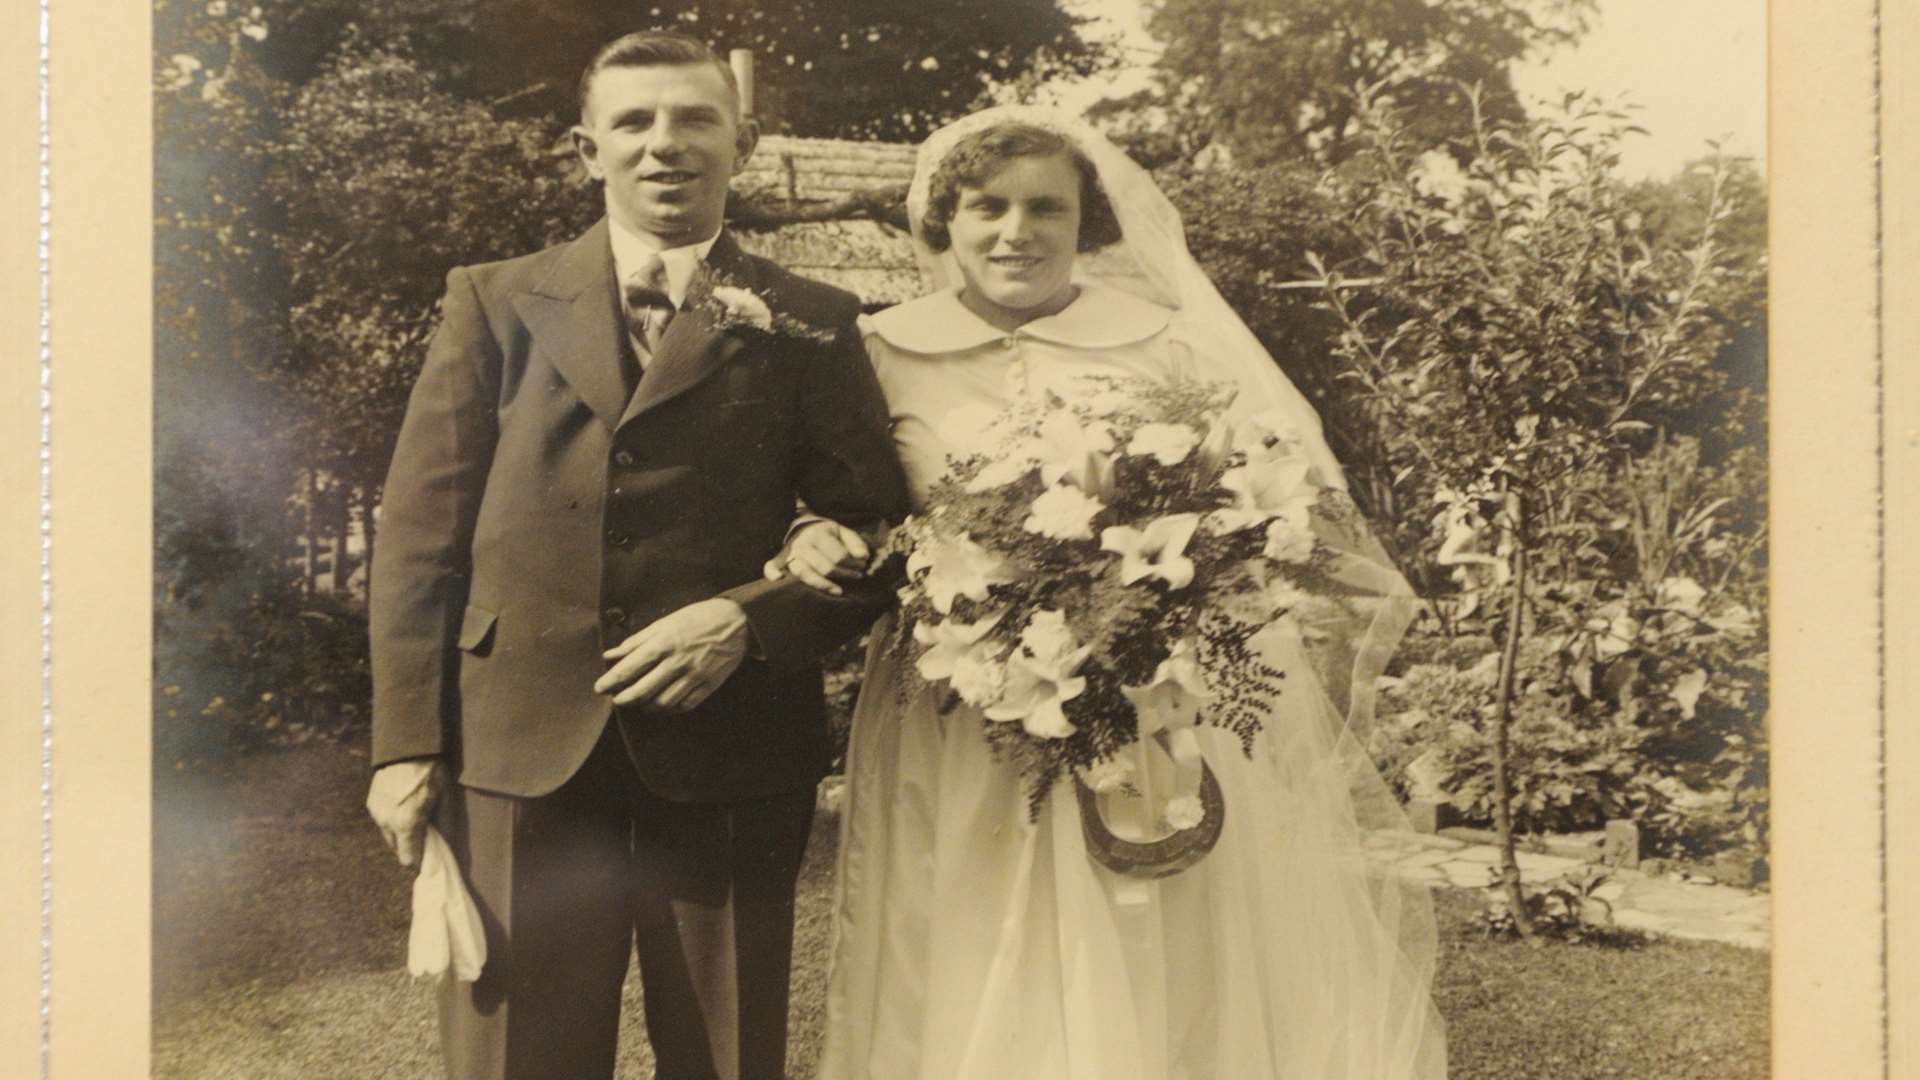 Dorothy Chantler turns 100. Pic of her wedding day, 5th August 1939.